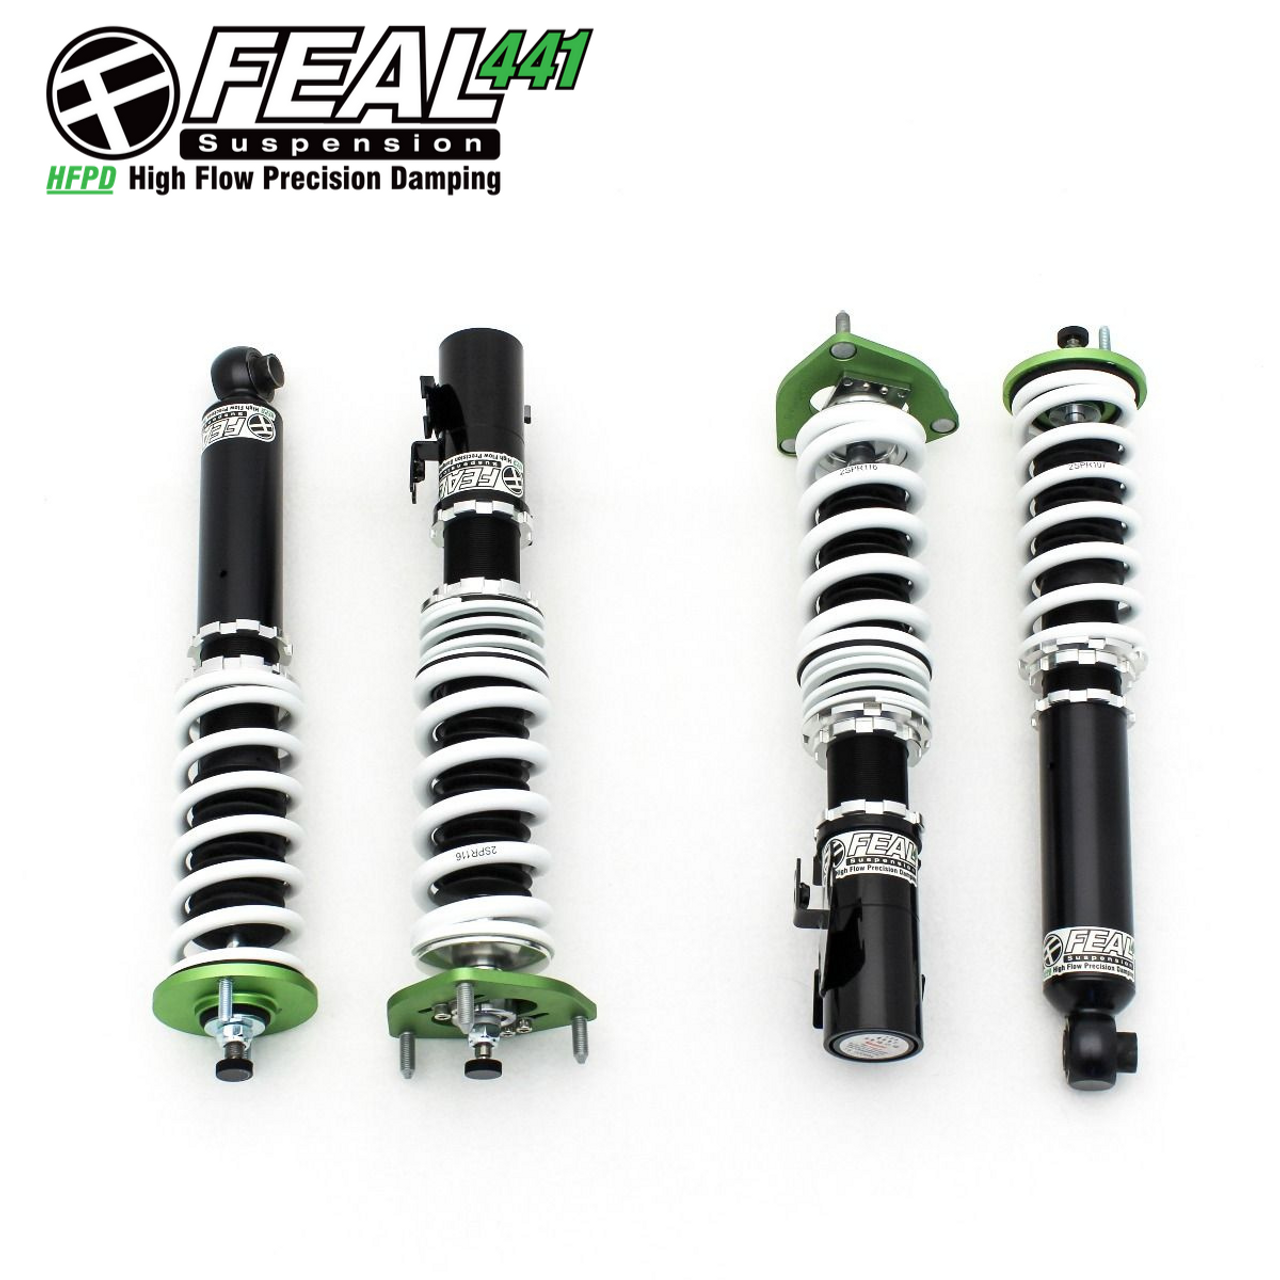 Feal Suspension 441 Coilover Kit, AWD - Infiniti Q50